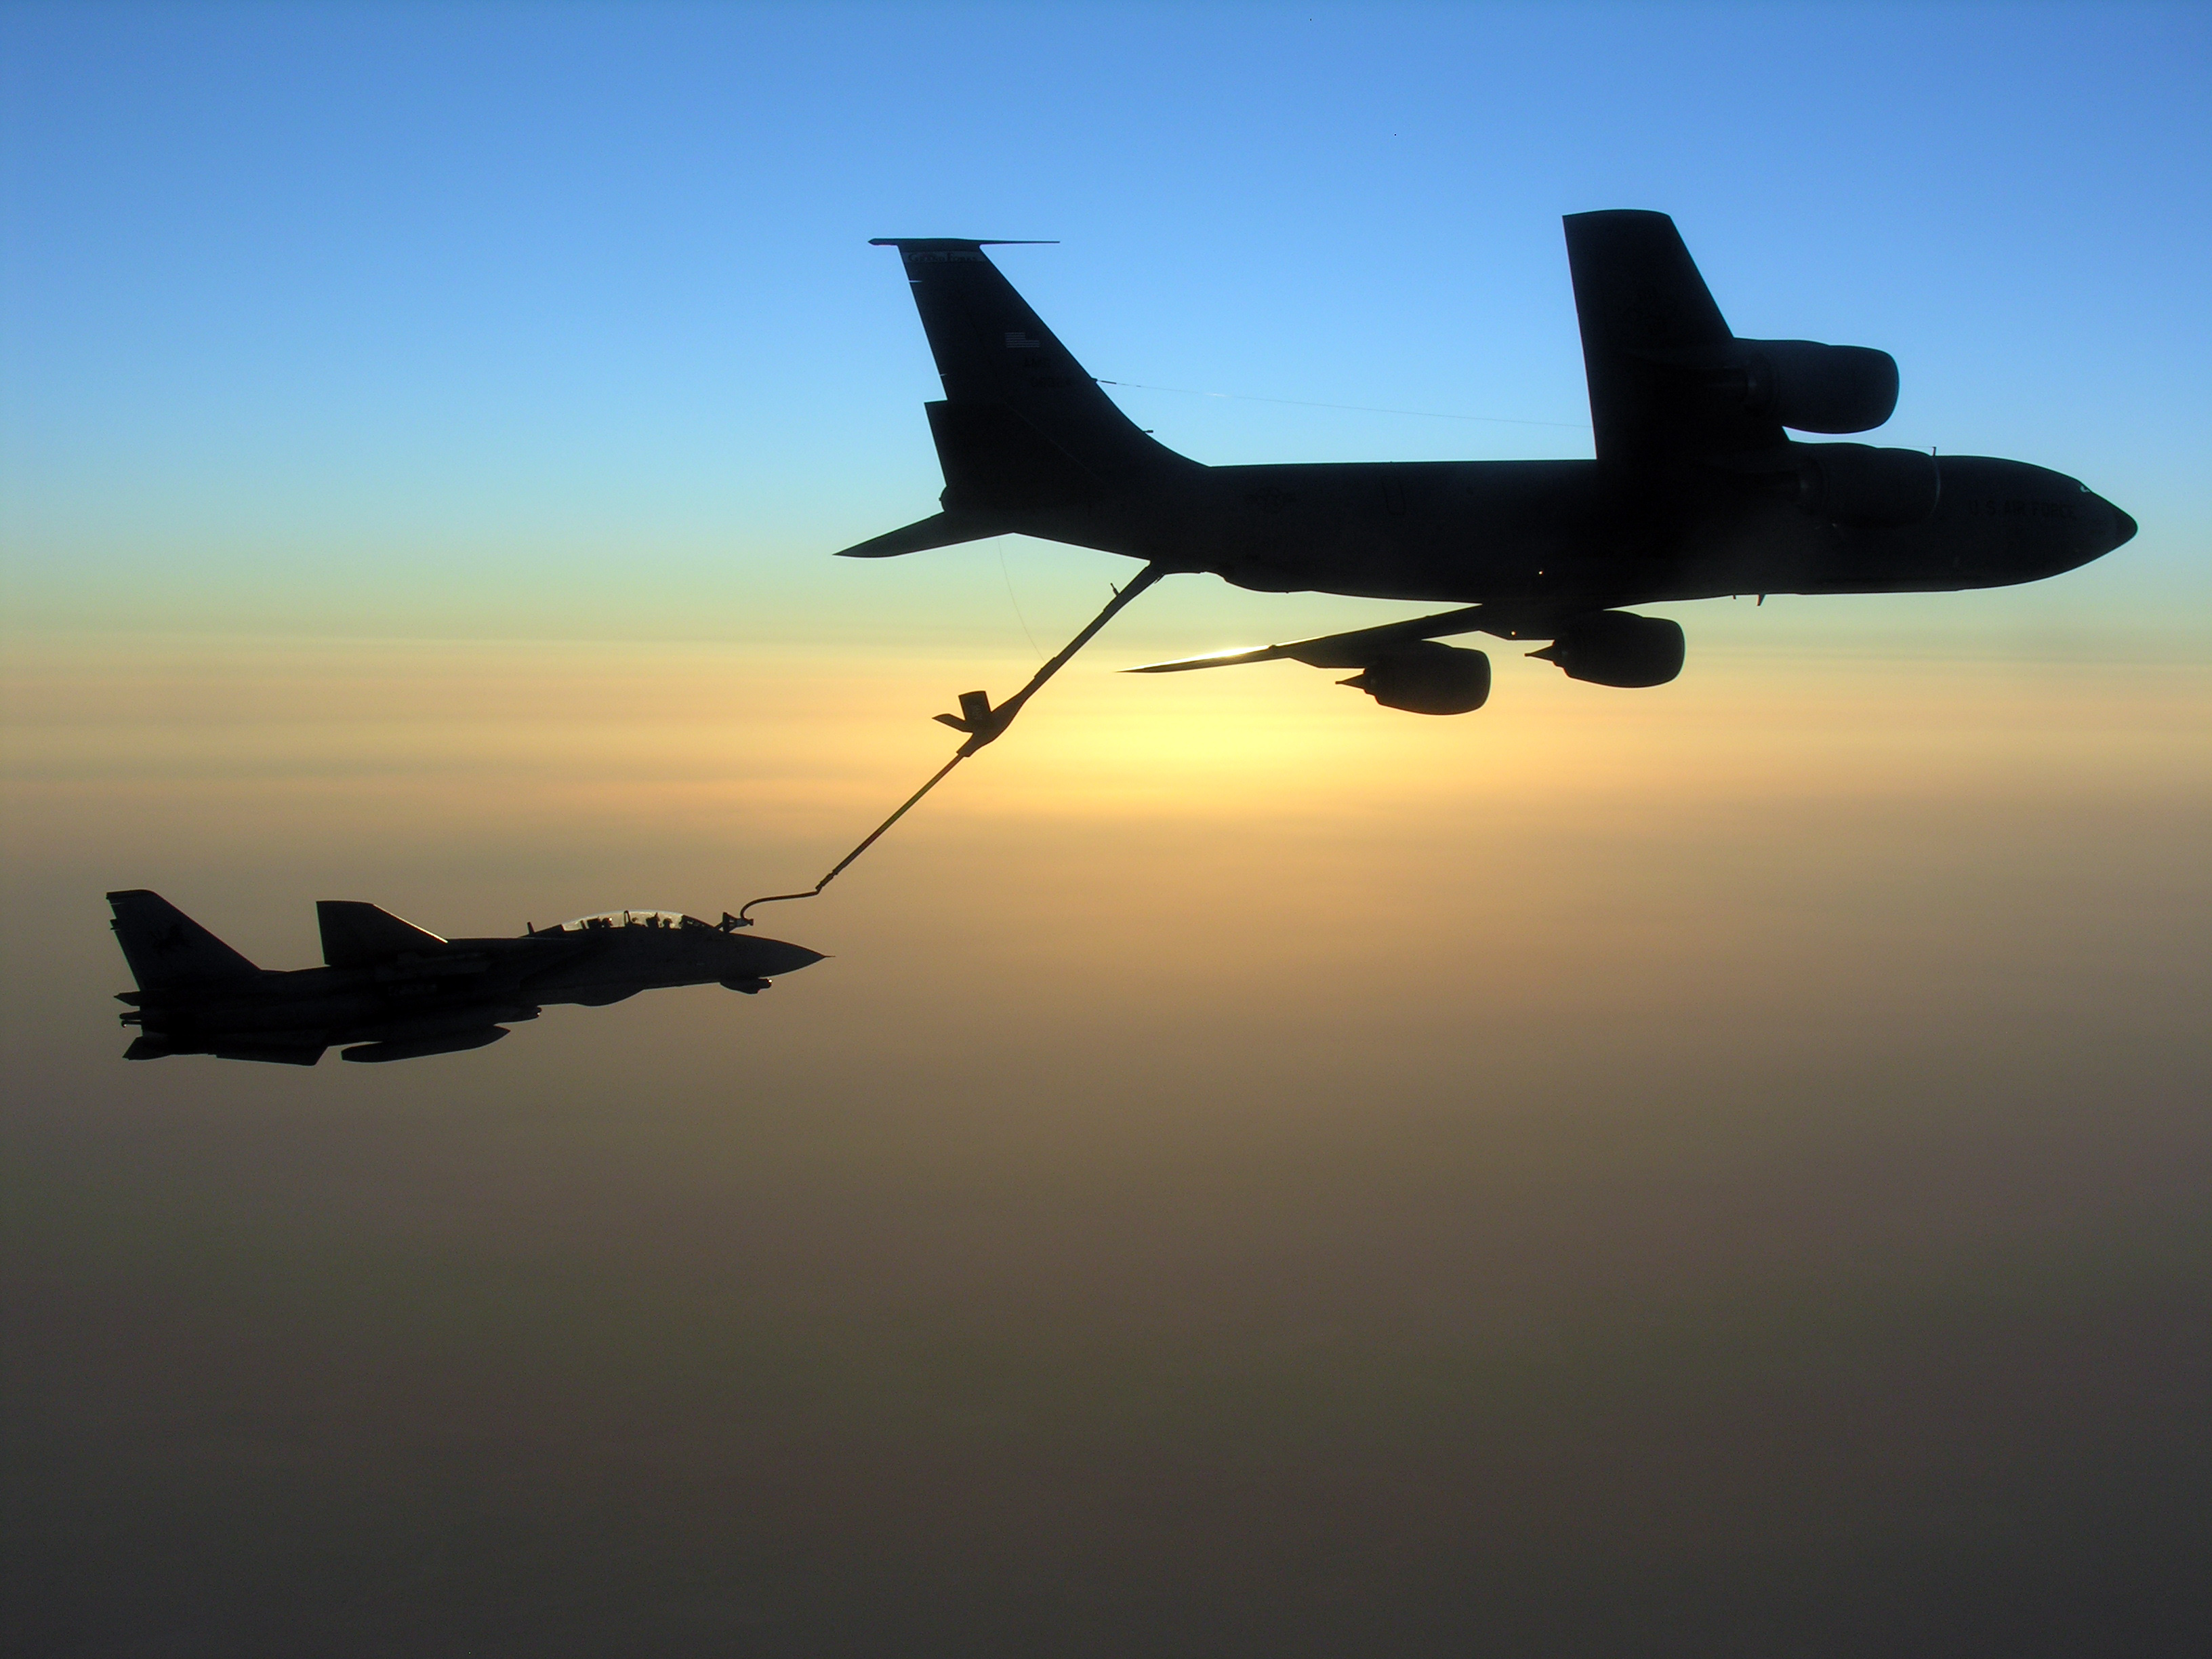 US Navy 051109-N-0000X-001 An F-14D Tomcat conducts aerial refueling with a U.S. Air Force KC-135 Stratotanker during a mission over the Persian Gulf region